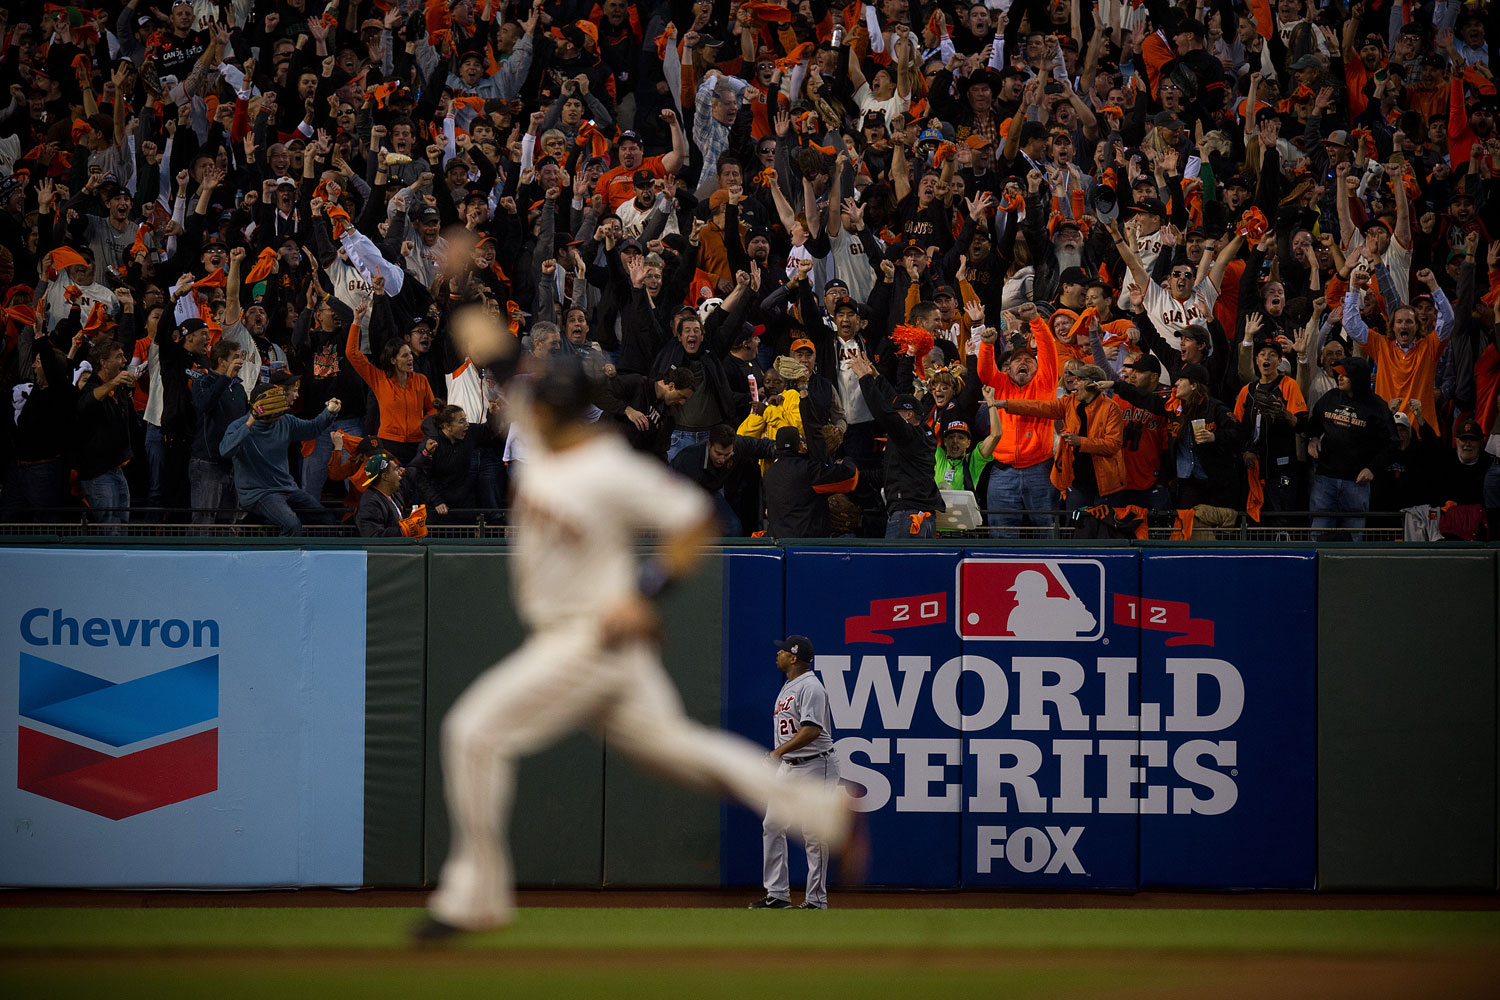 Image: Oct. 24, 2012. Detroit Tigers left-fielder Delmon Young watches as the San Francisco Giants' Pablo Sandoval second home run goes over the wall in Game 1 of the World Series at AT&T Park in San Francisco.